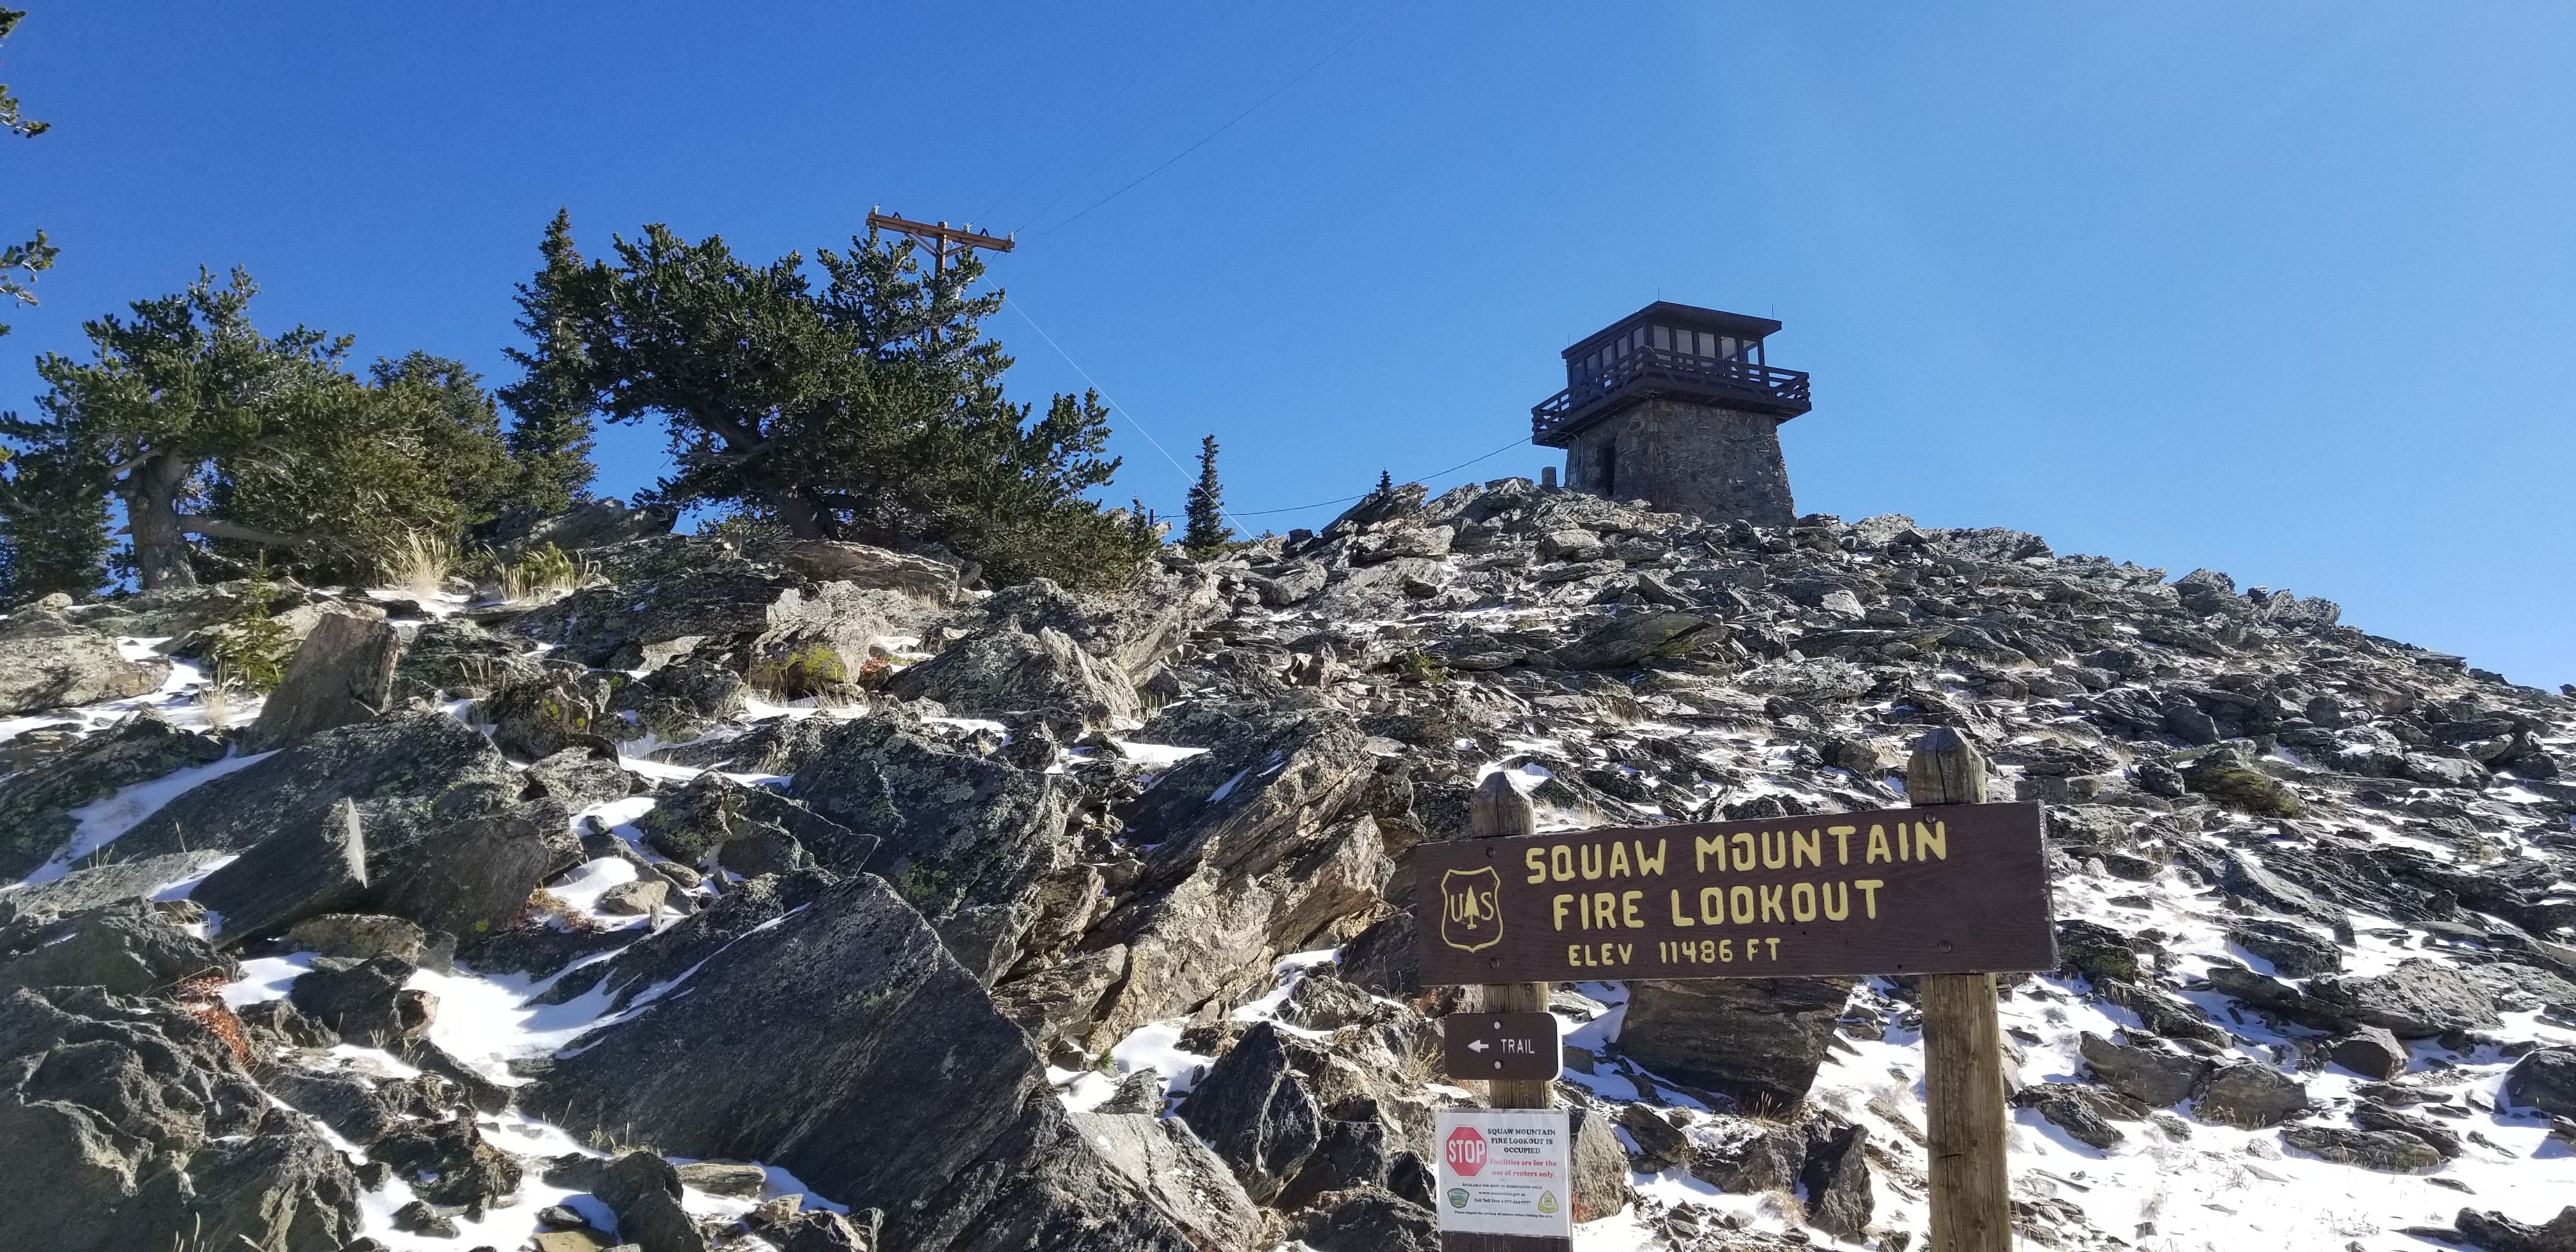 Camper submitted image from Squaw Mountain Fire Lookout - 4